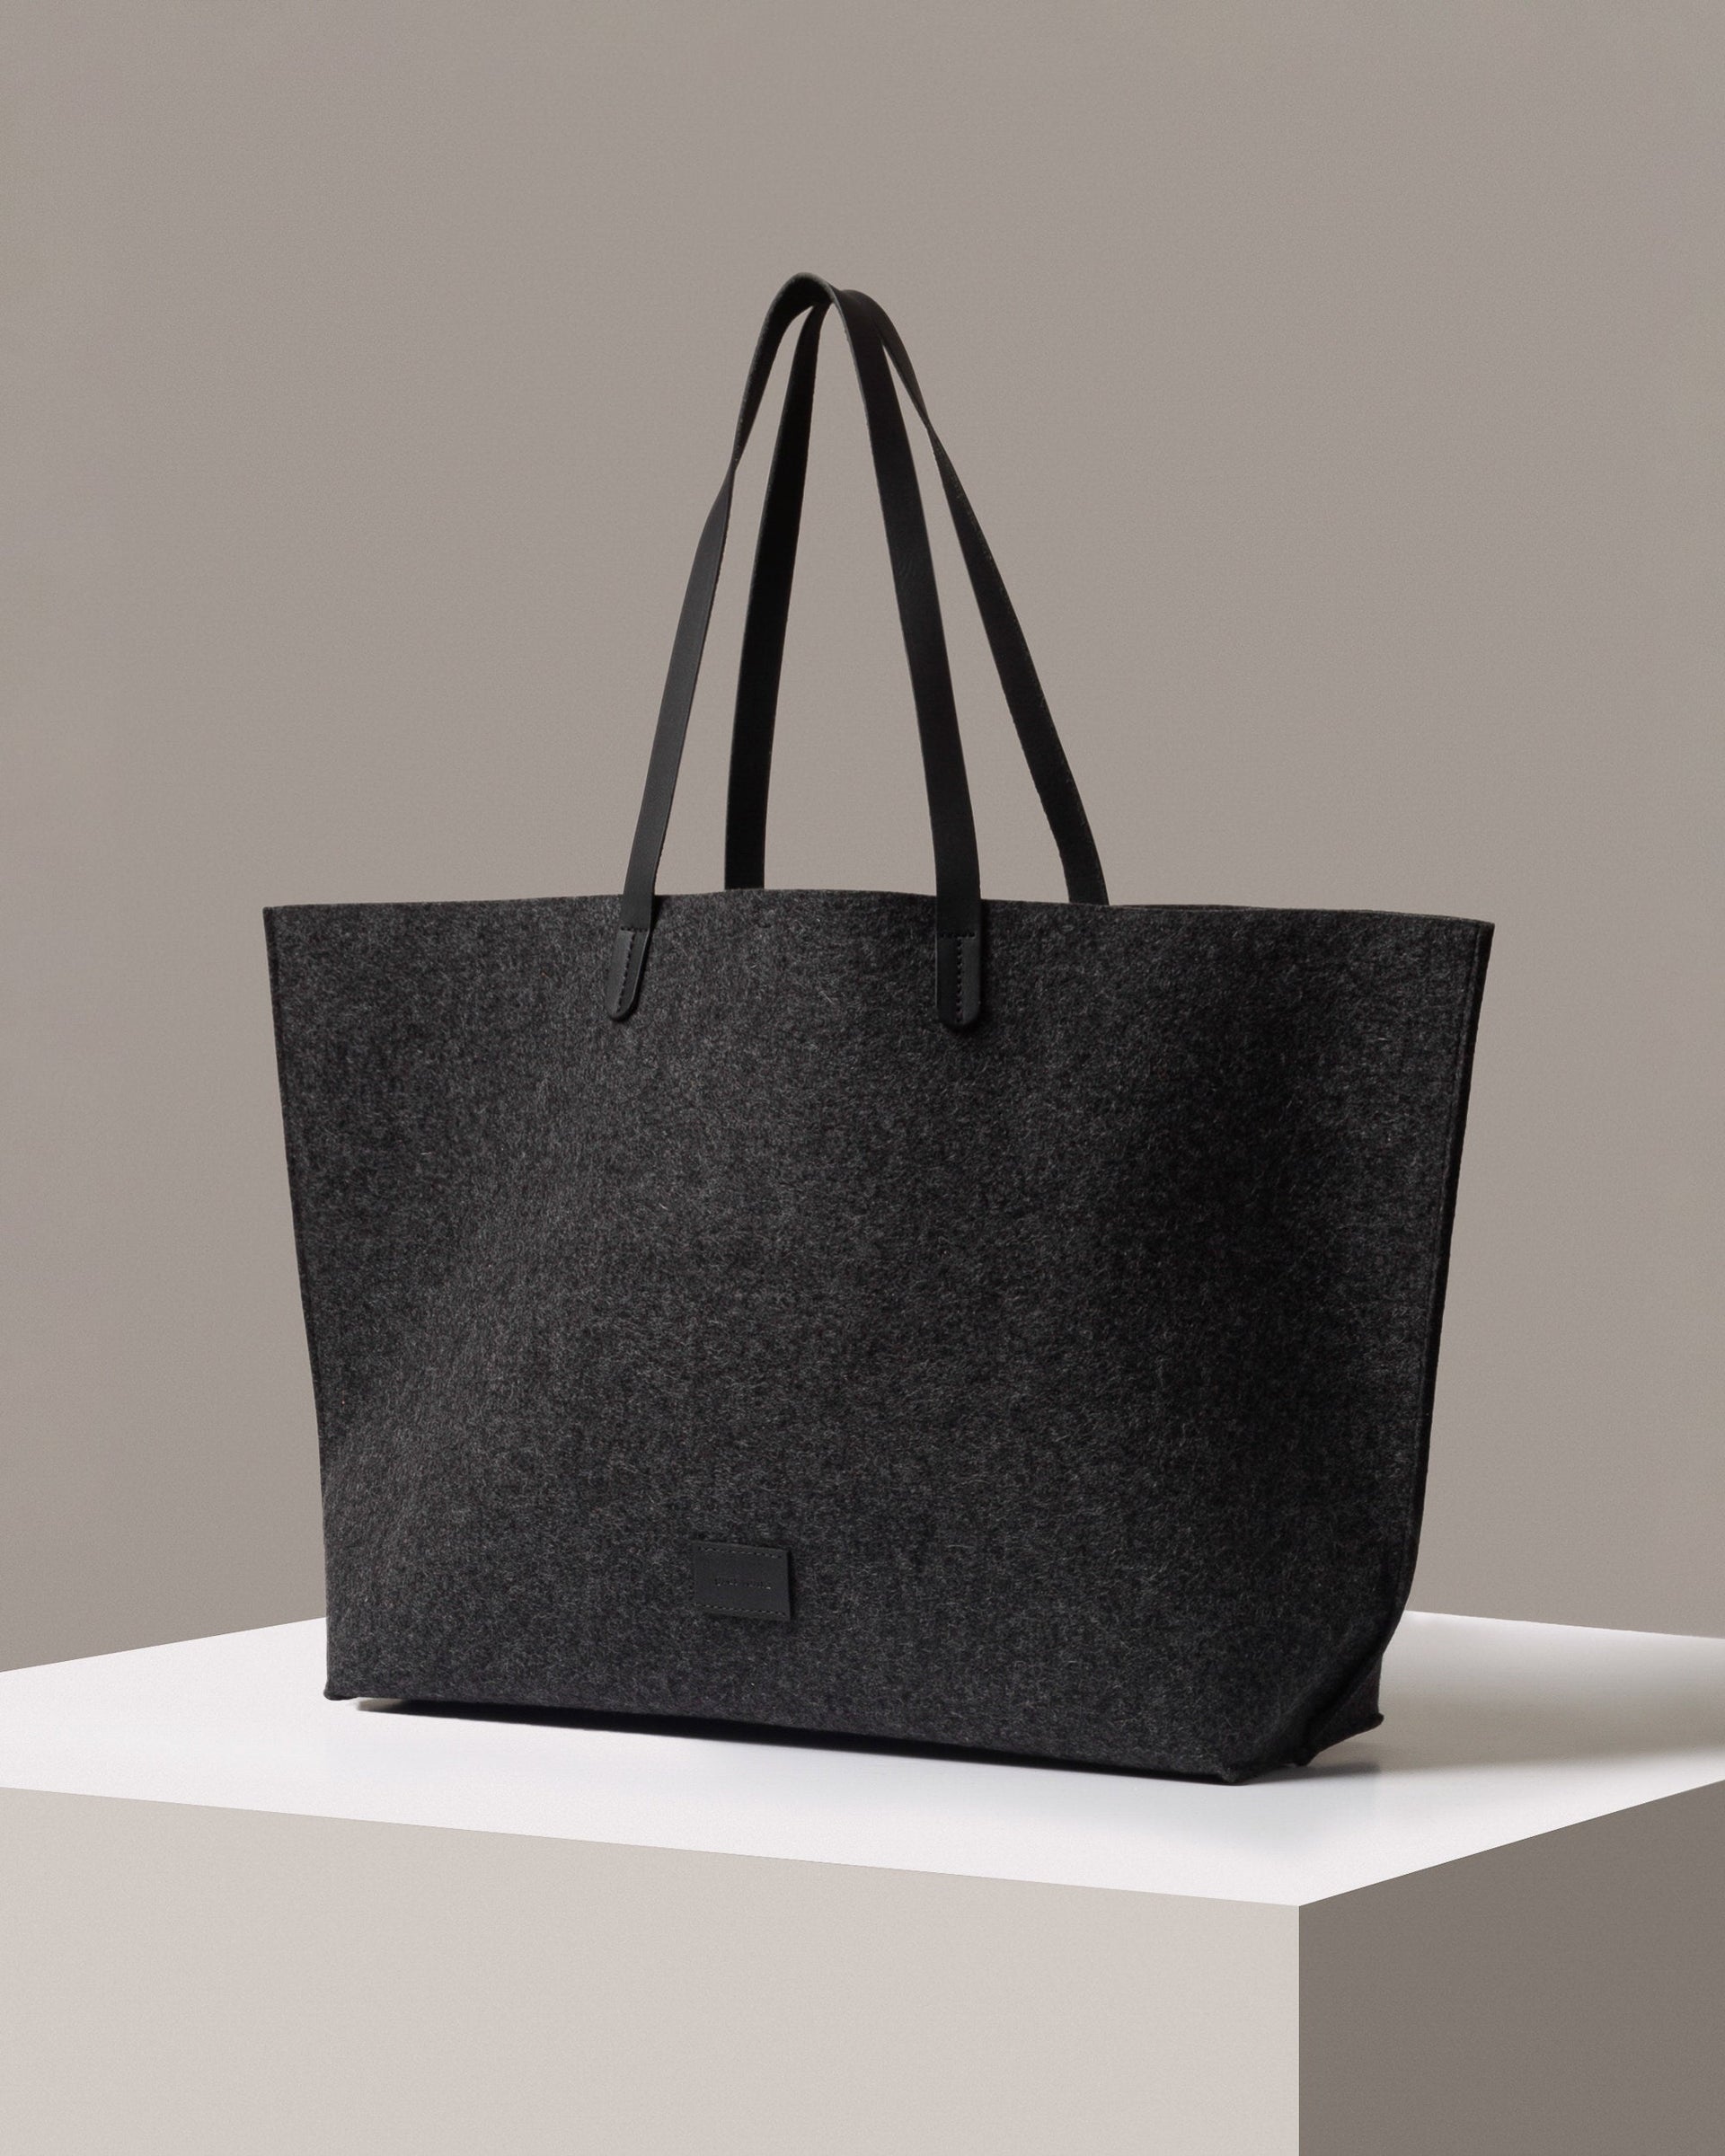 A stylish Hana Merino Wool Felt Boat Bag in dark gray with black leather handles, displayed in a three-quarter view on a white base